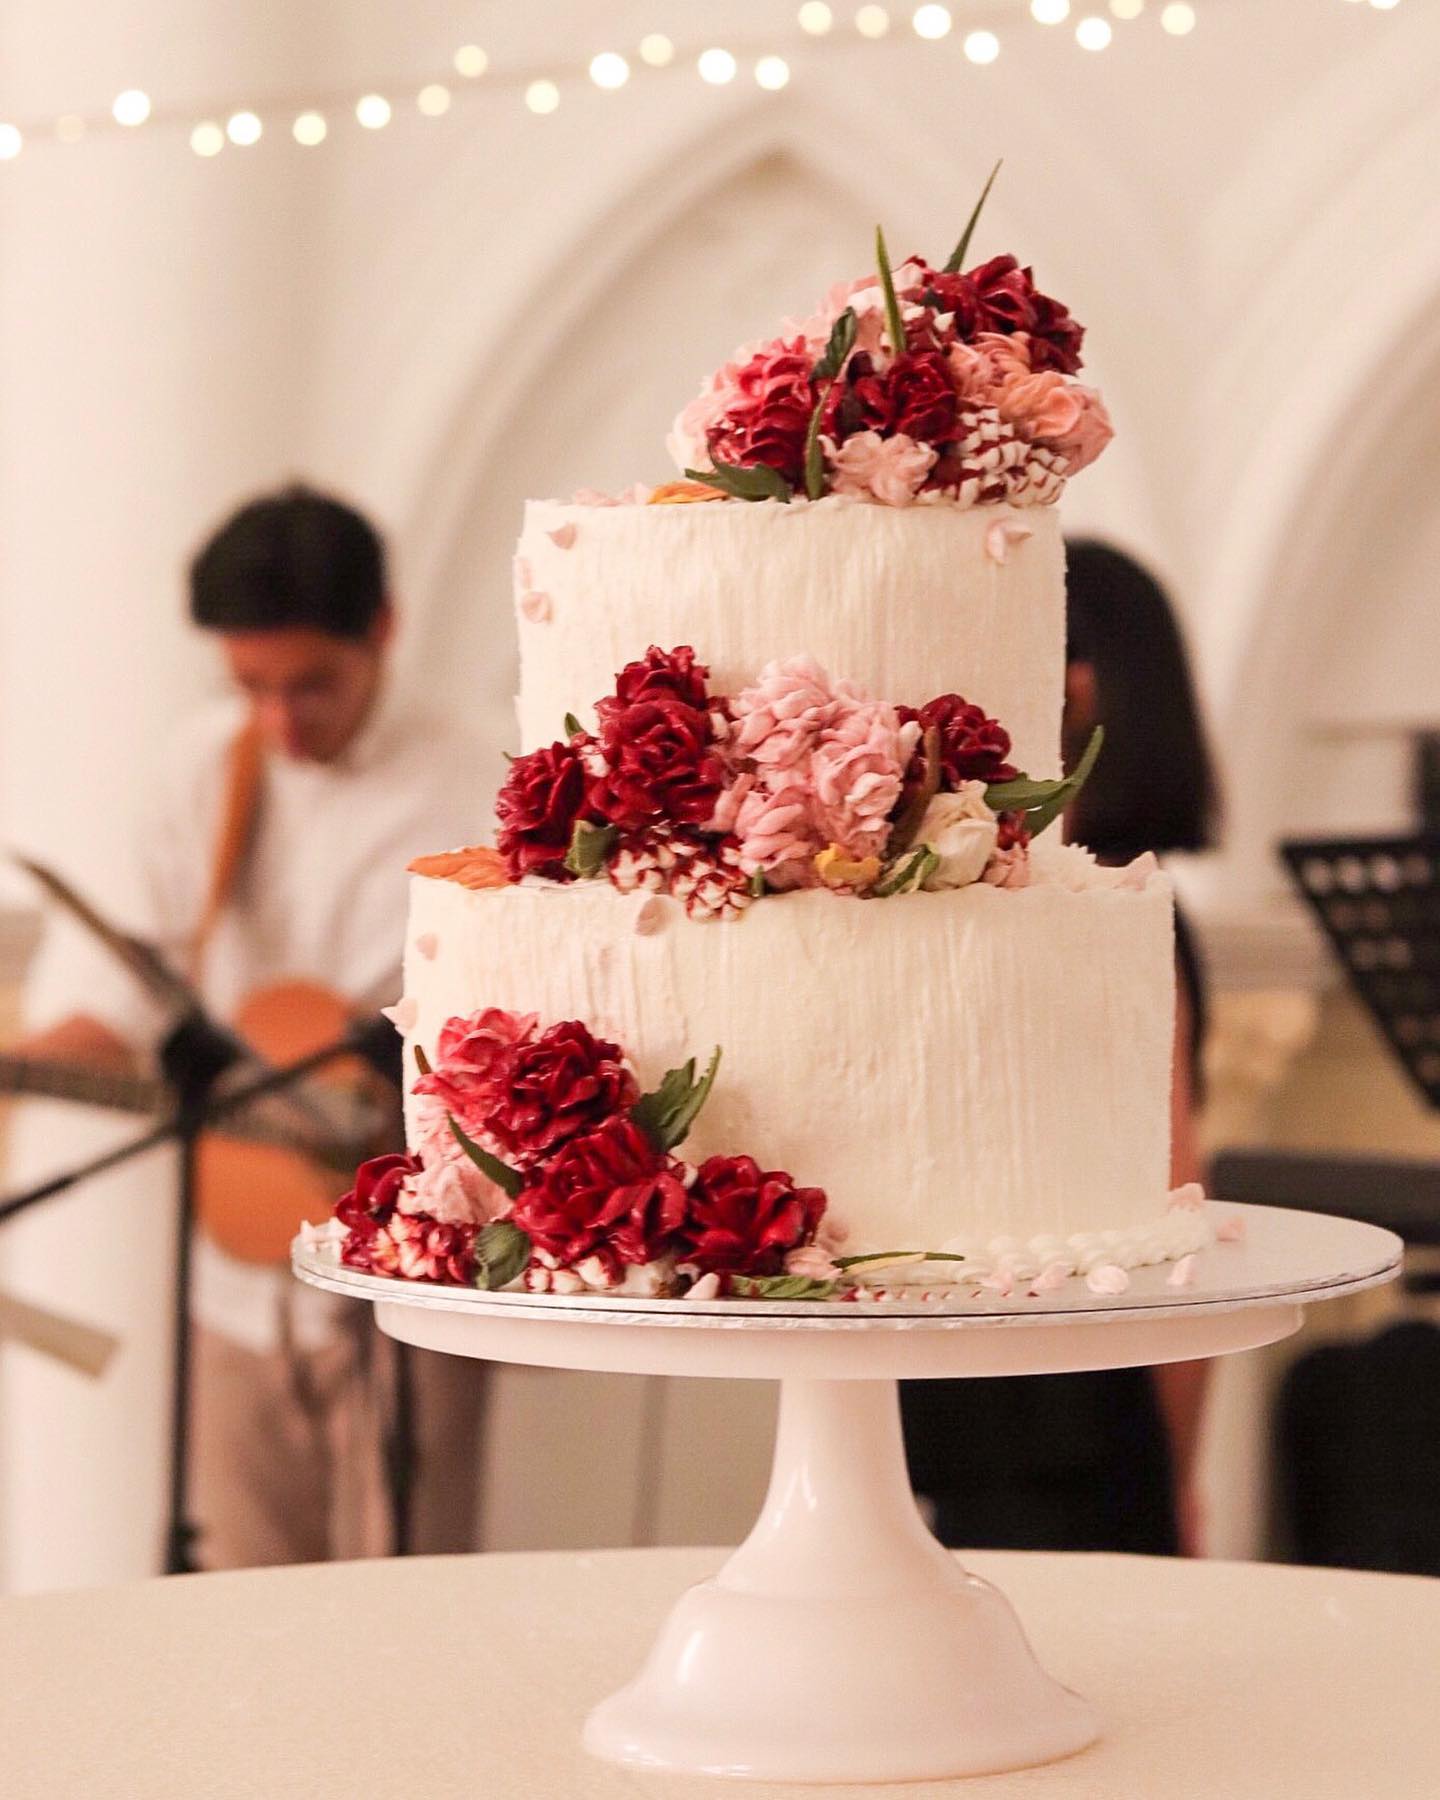 15 Popular Shops for Wedding Cakes in Singapore